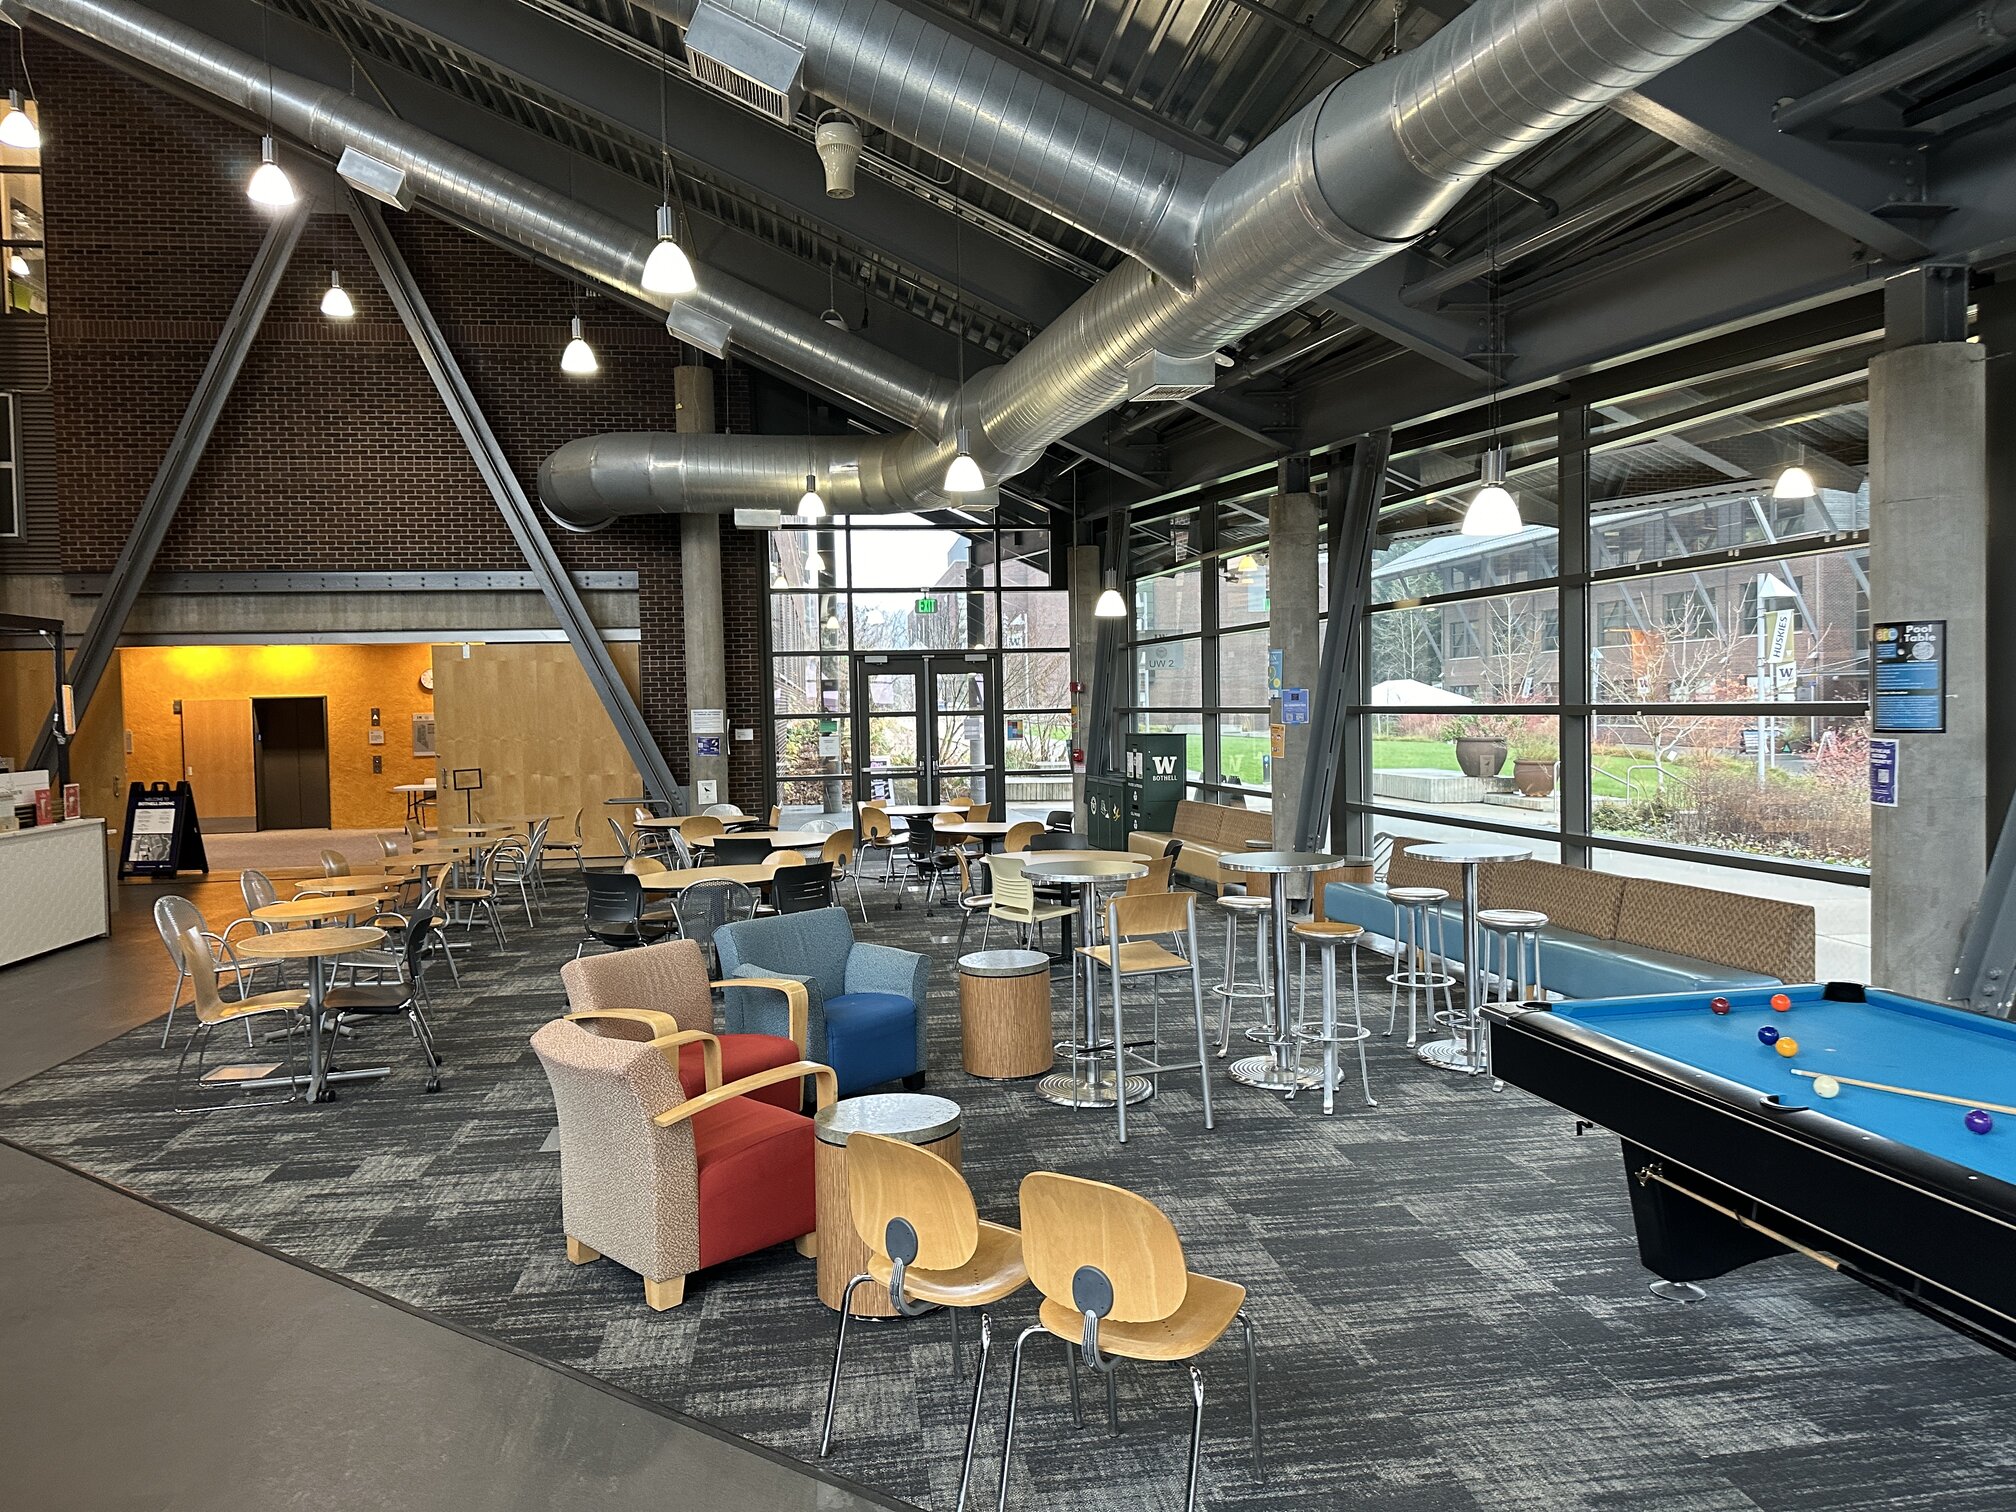 Commons area for socialization. Various sized tables with chairs in a cafe style setting. Located in front of the Gold Brew Cafe in UW2. Pool table for recreational use.